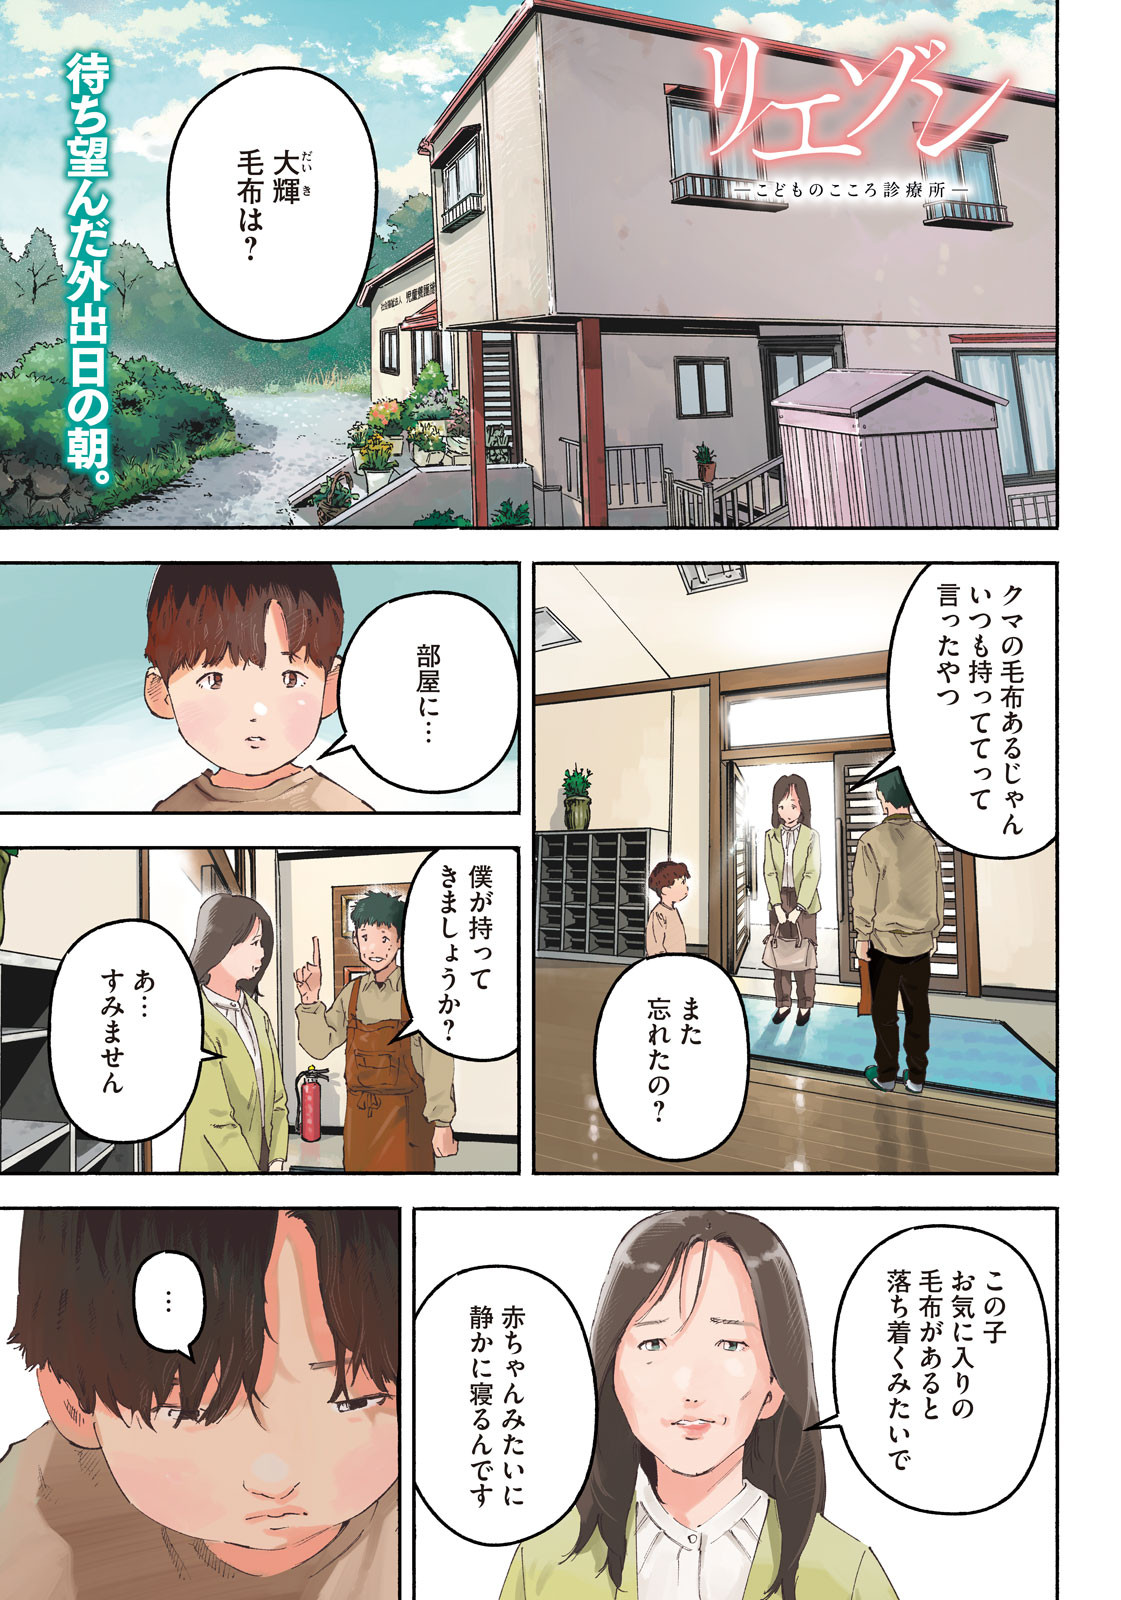 Weekly Morning - 週刊モーニング - Chapter 2023-26 - Page 3